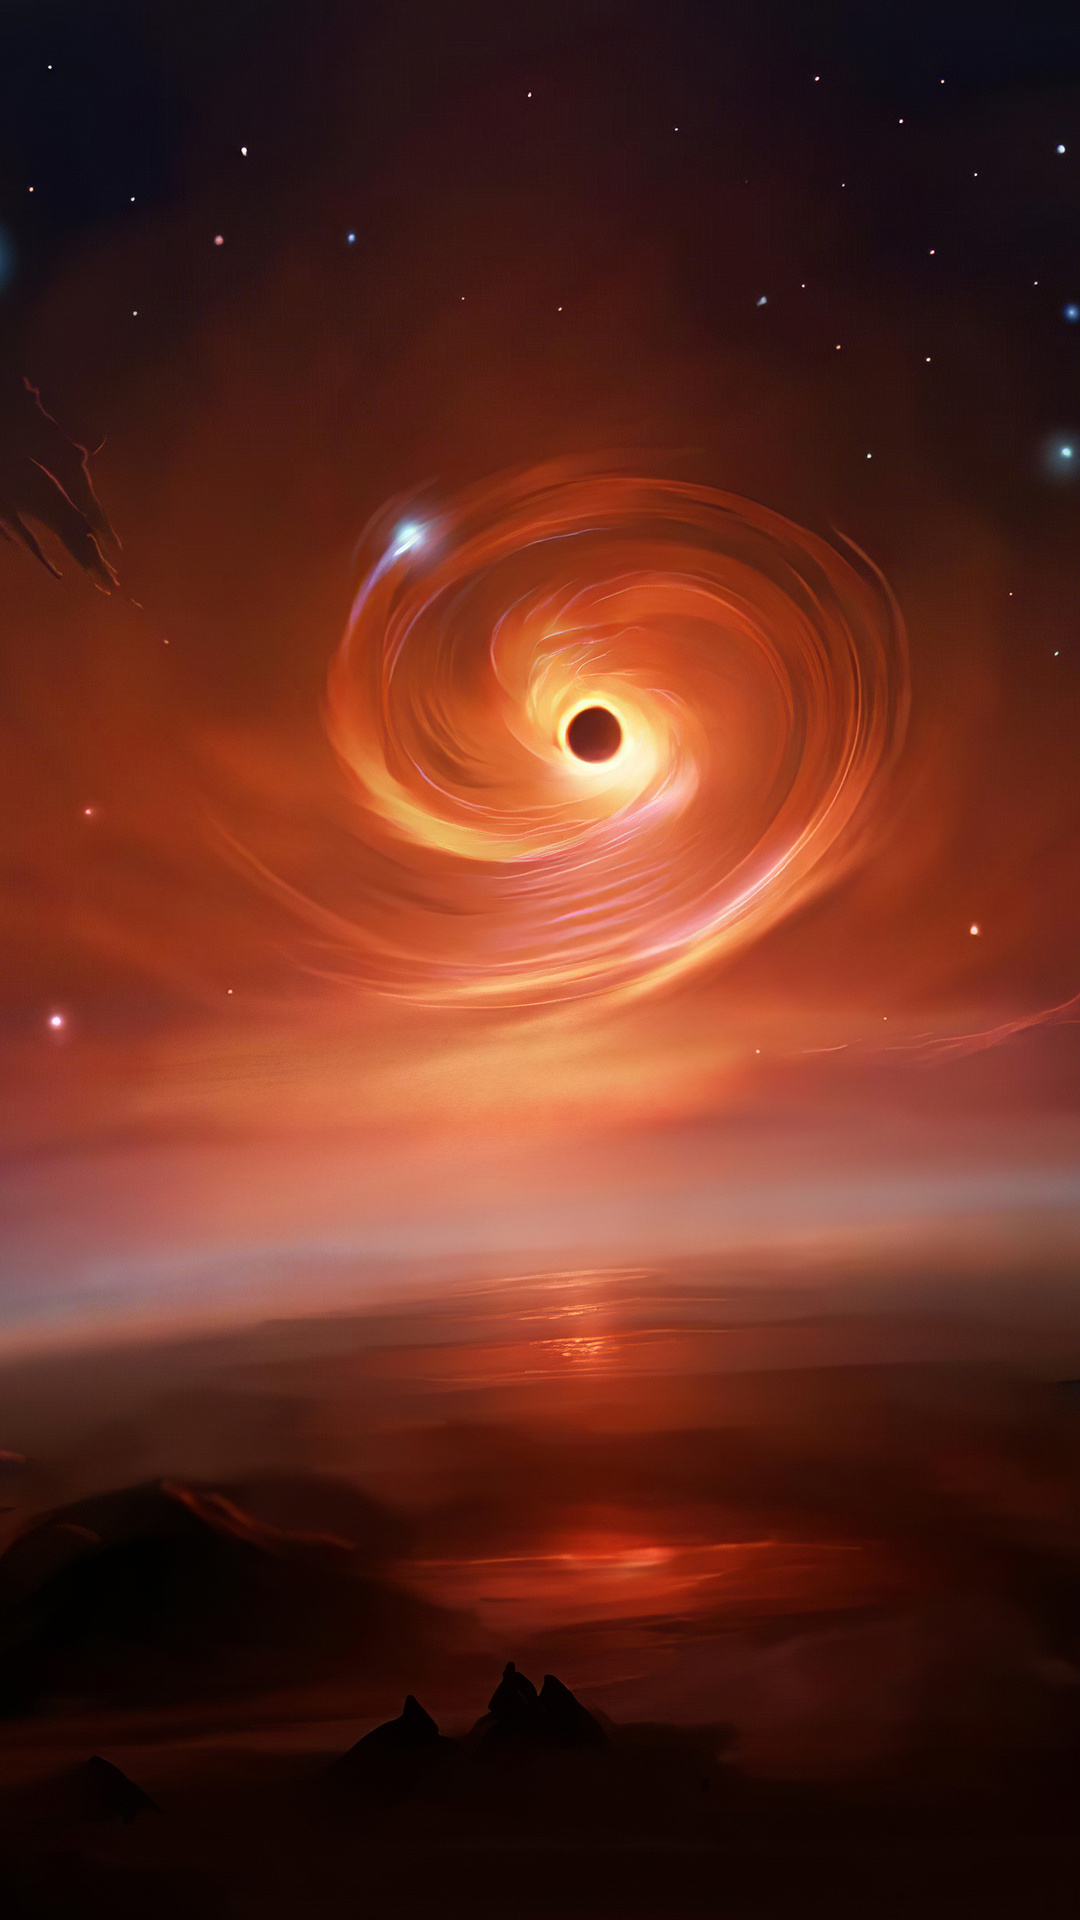 Black Hole wallpaper by sergiugreat  Download on ZEDGE  b4cc